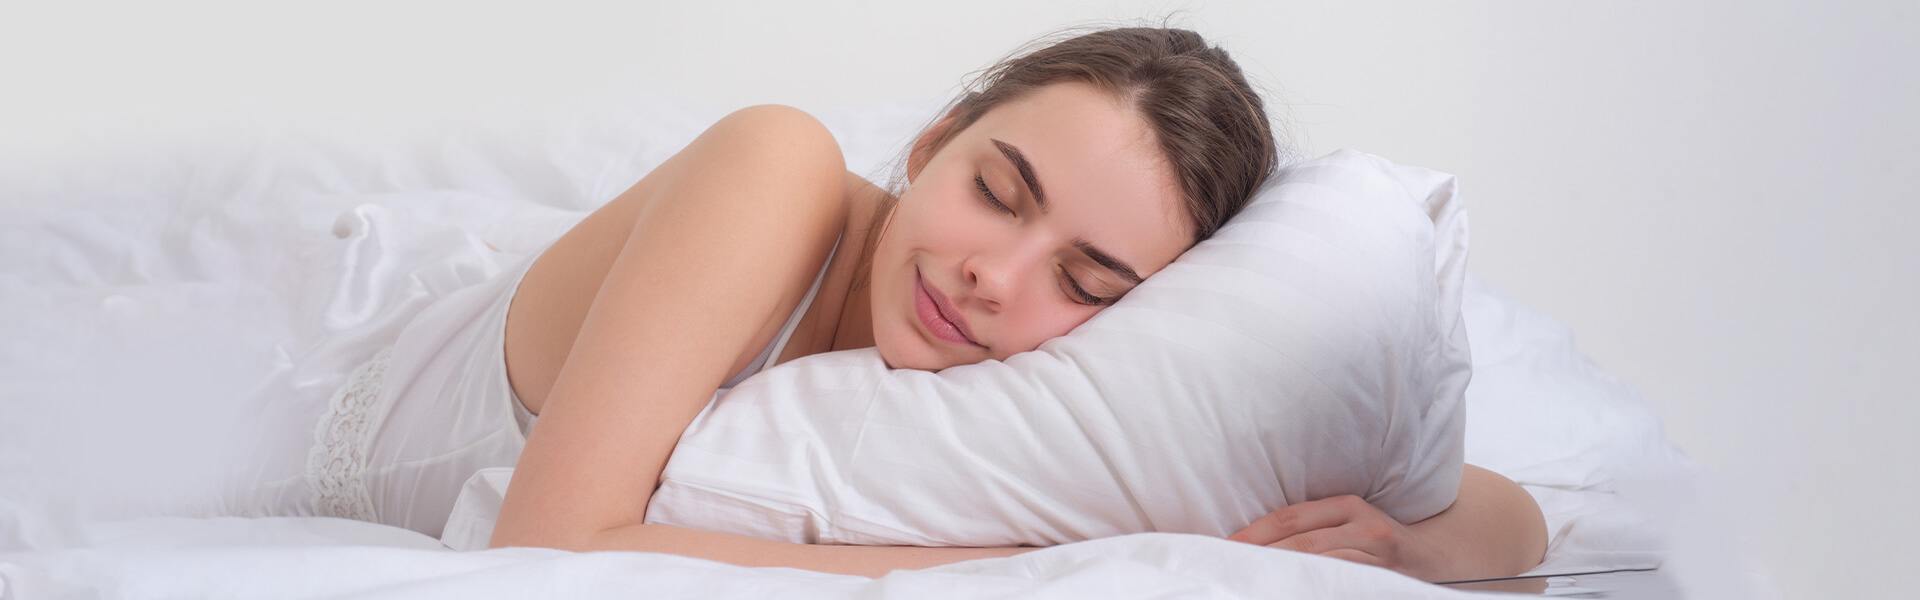 What Are the Risks of Untreated Sleep Apnea?